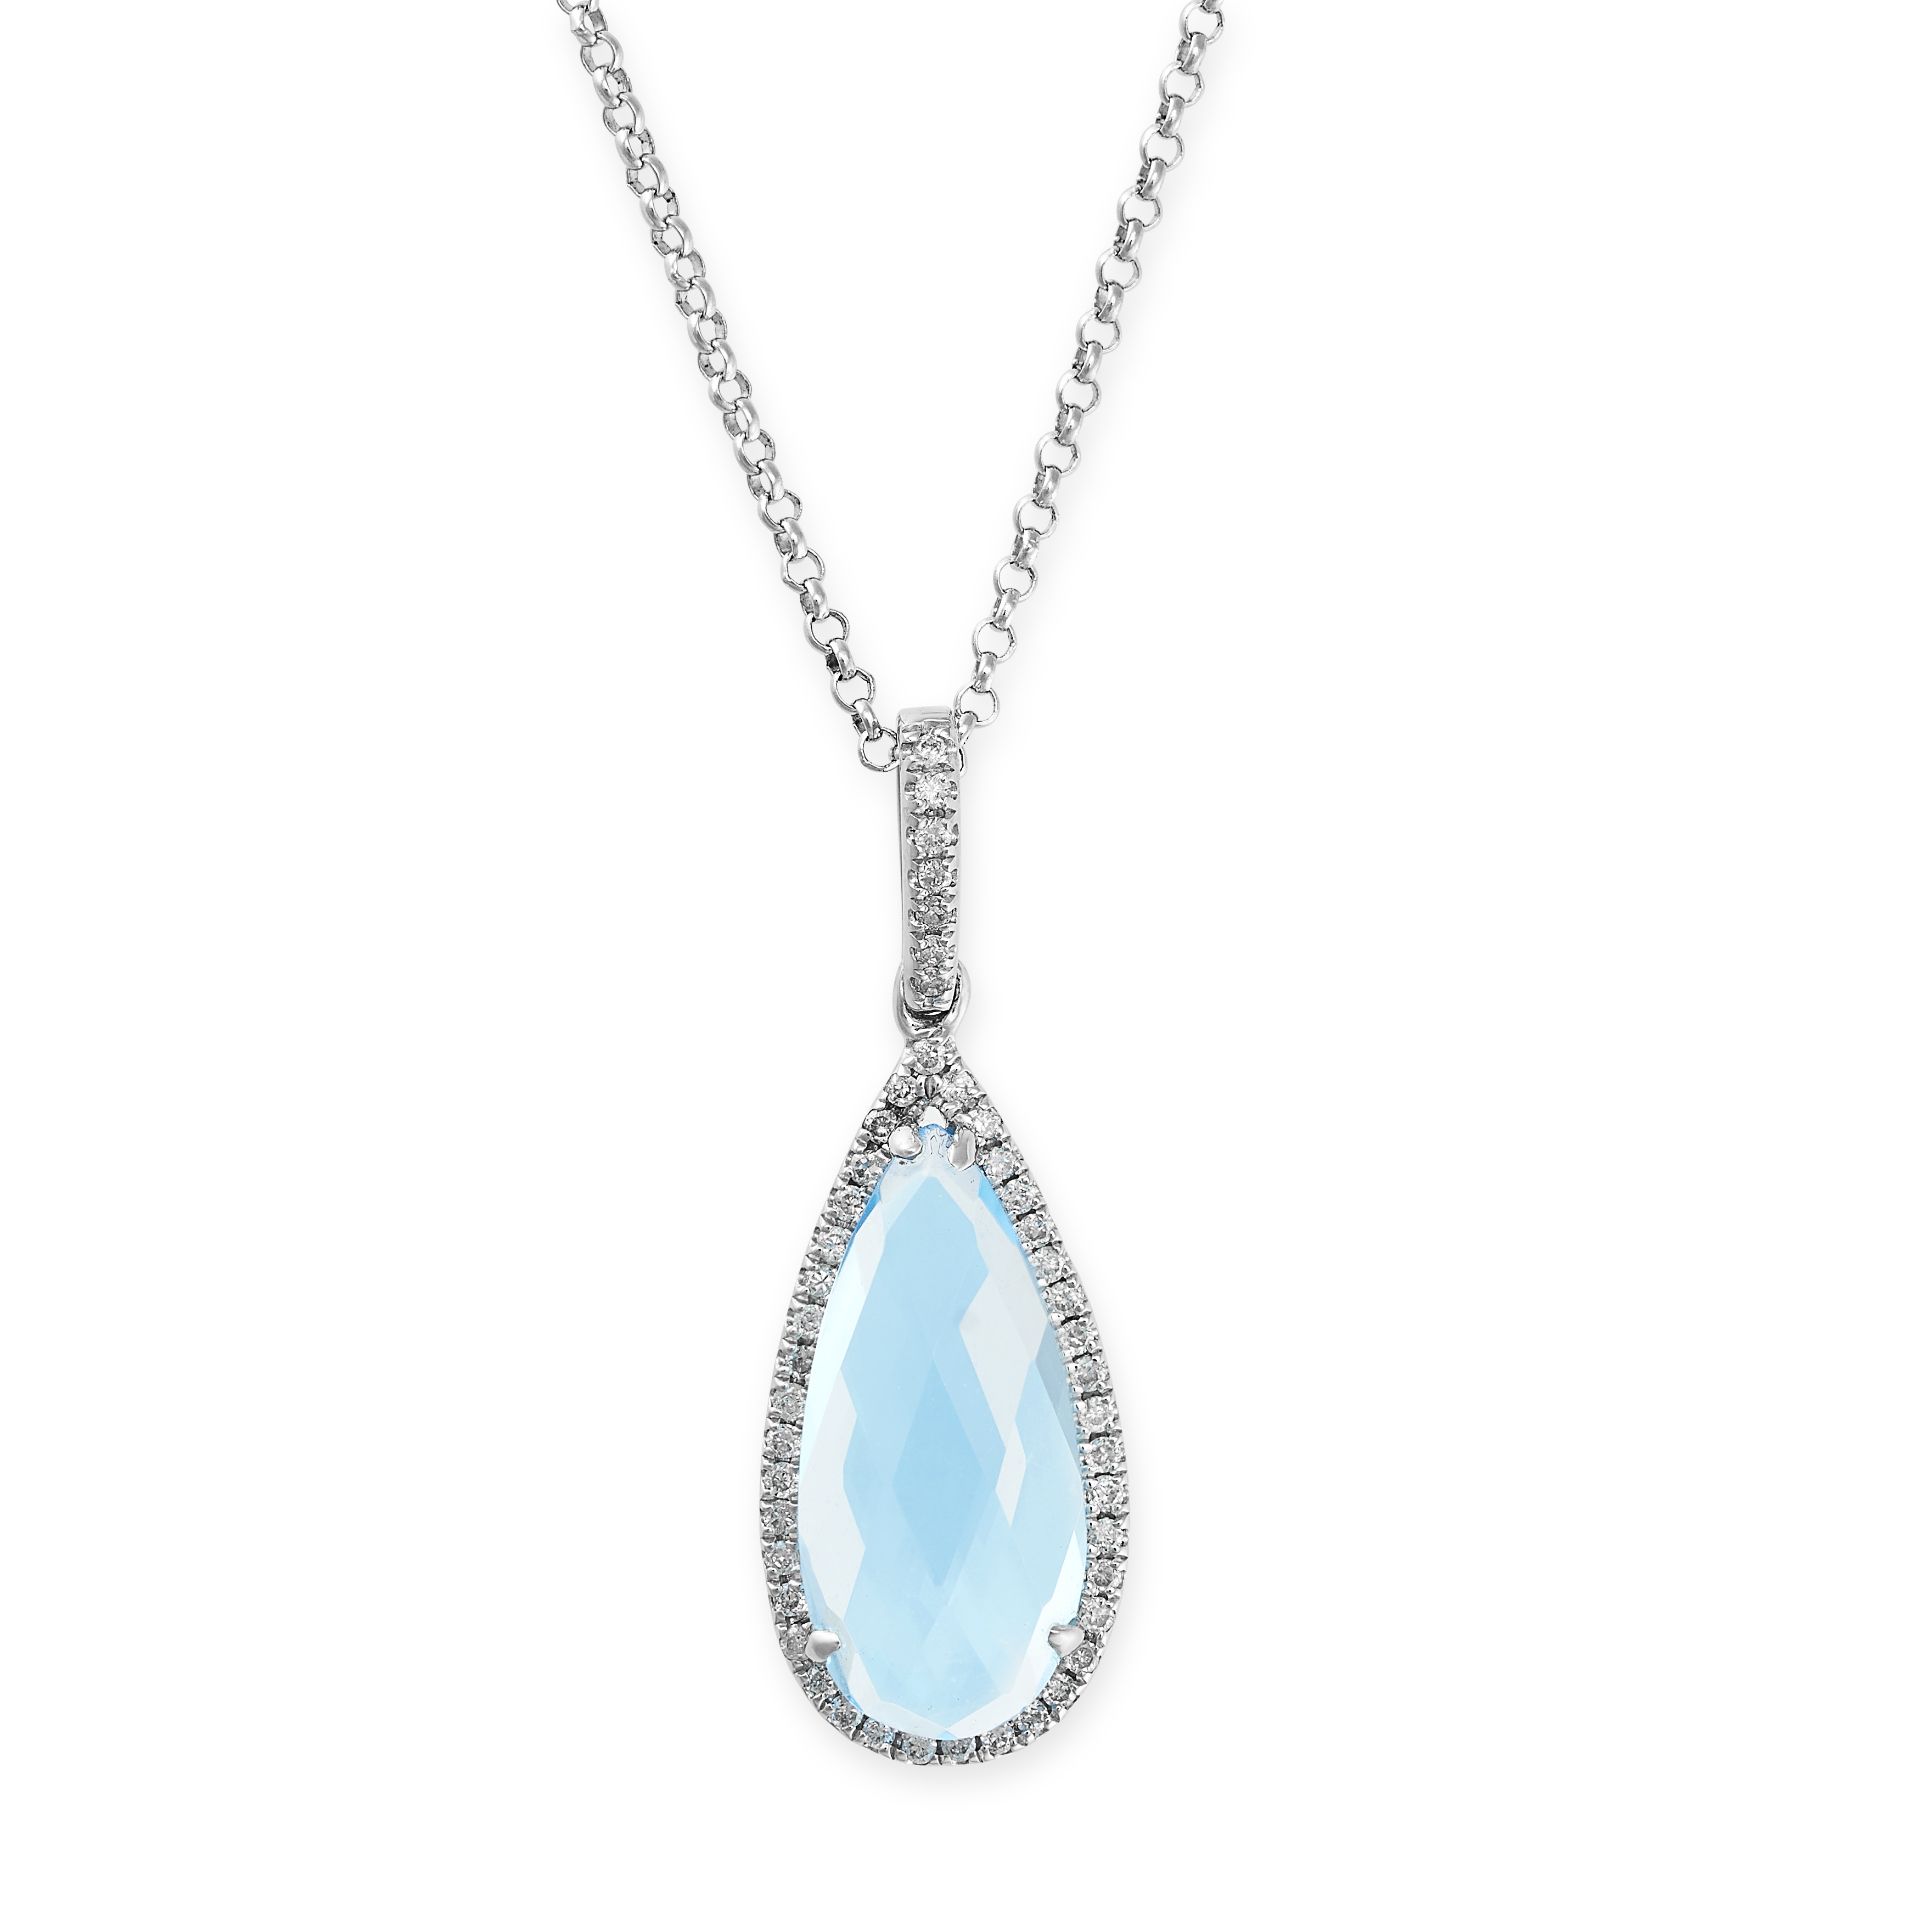 A BLUE TOPAZ AND DIAMOND PENDANT NECKLACE in 18ct white gold, the pendant set with a pear shaped ... - Image 2 of 2